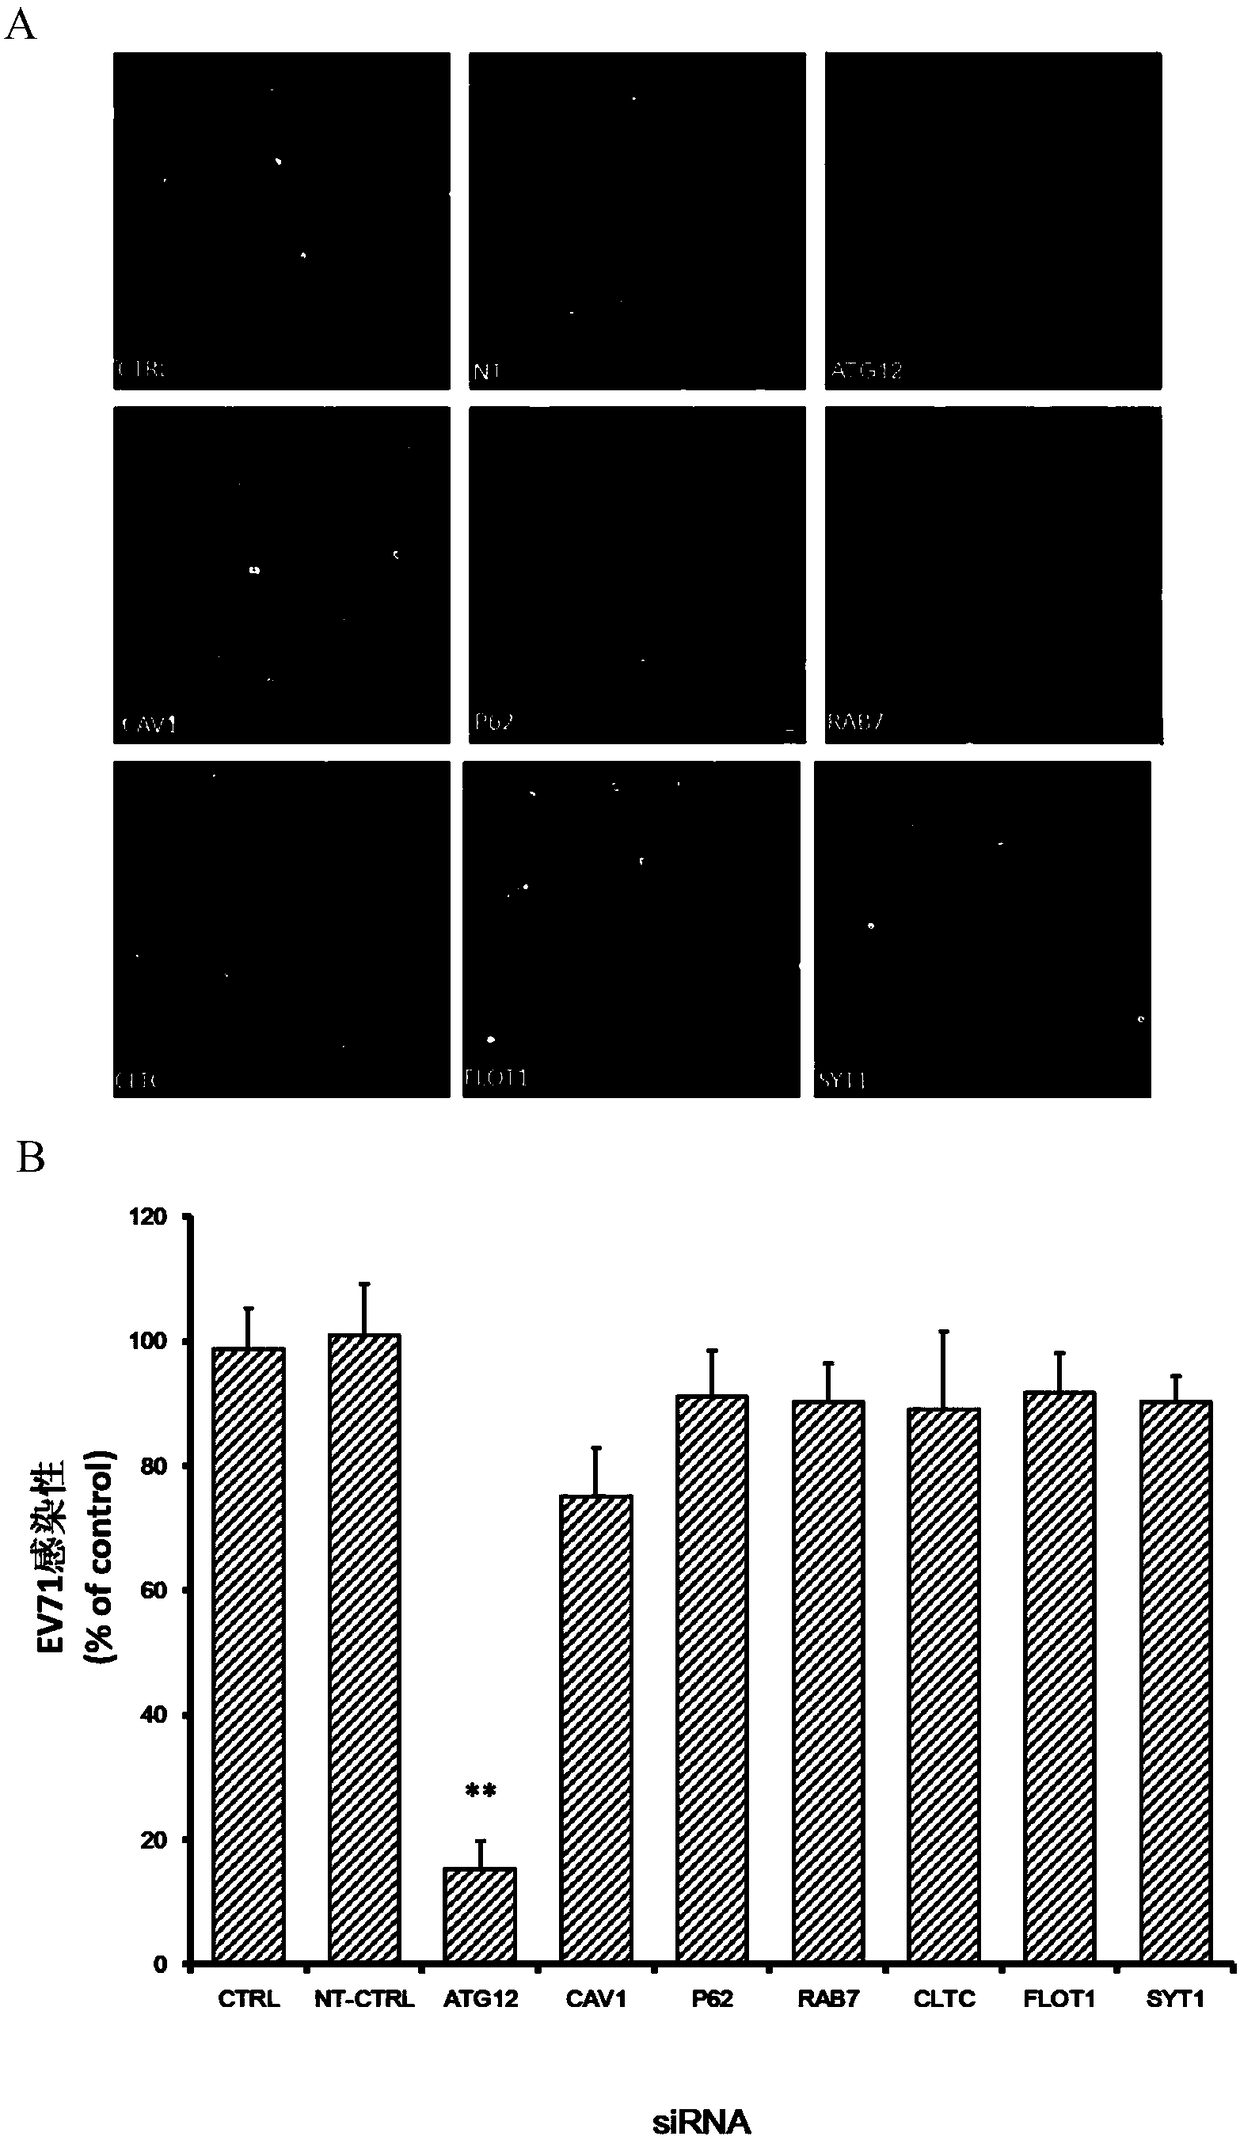 Application of autophagy-related protein 12 in the prevention and treatment of enterovirus 71 infection